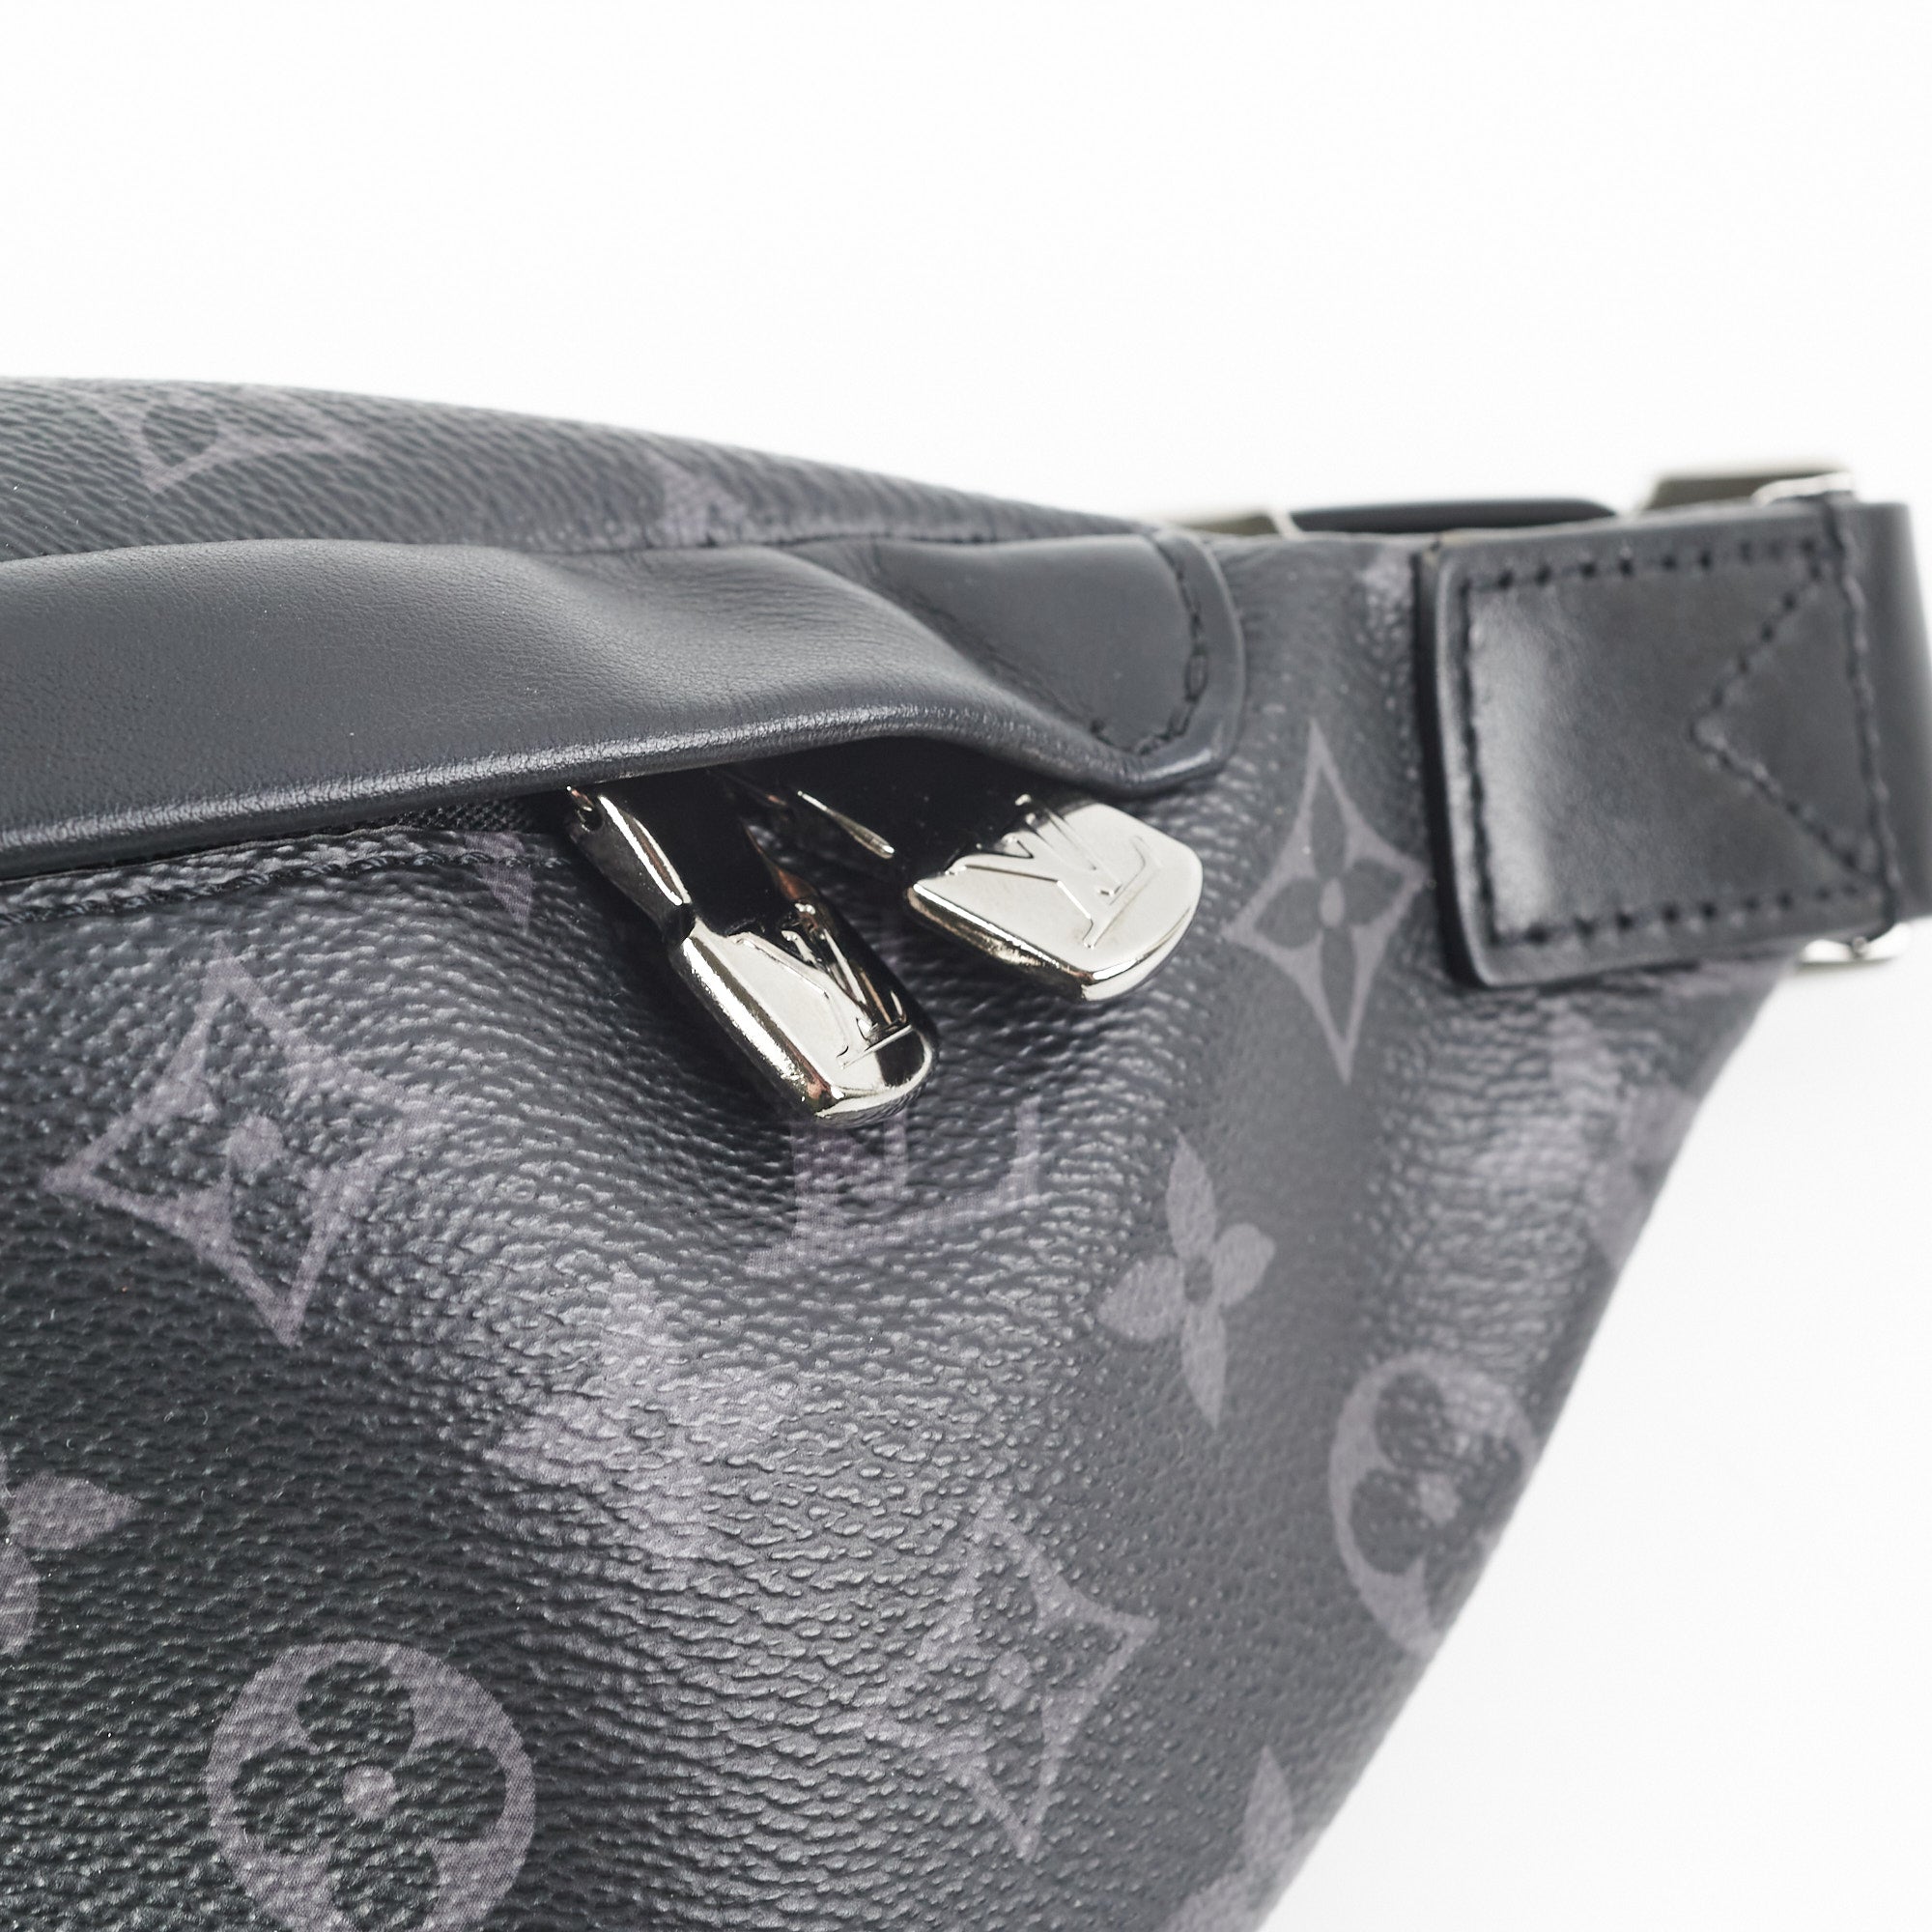 Shop Louis Vuitton Discovery Discovery bumbag pm (M46036) by IMPORTfabulous